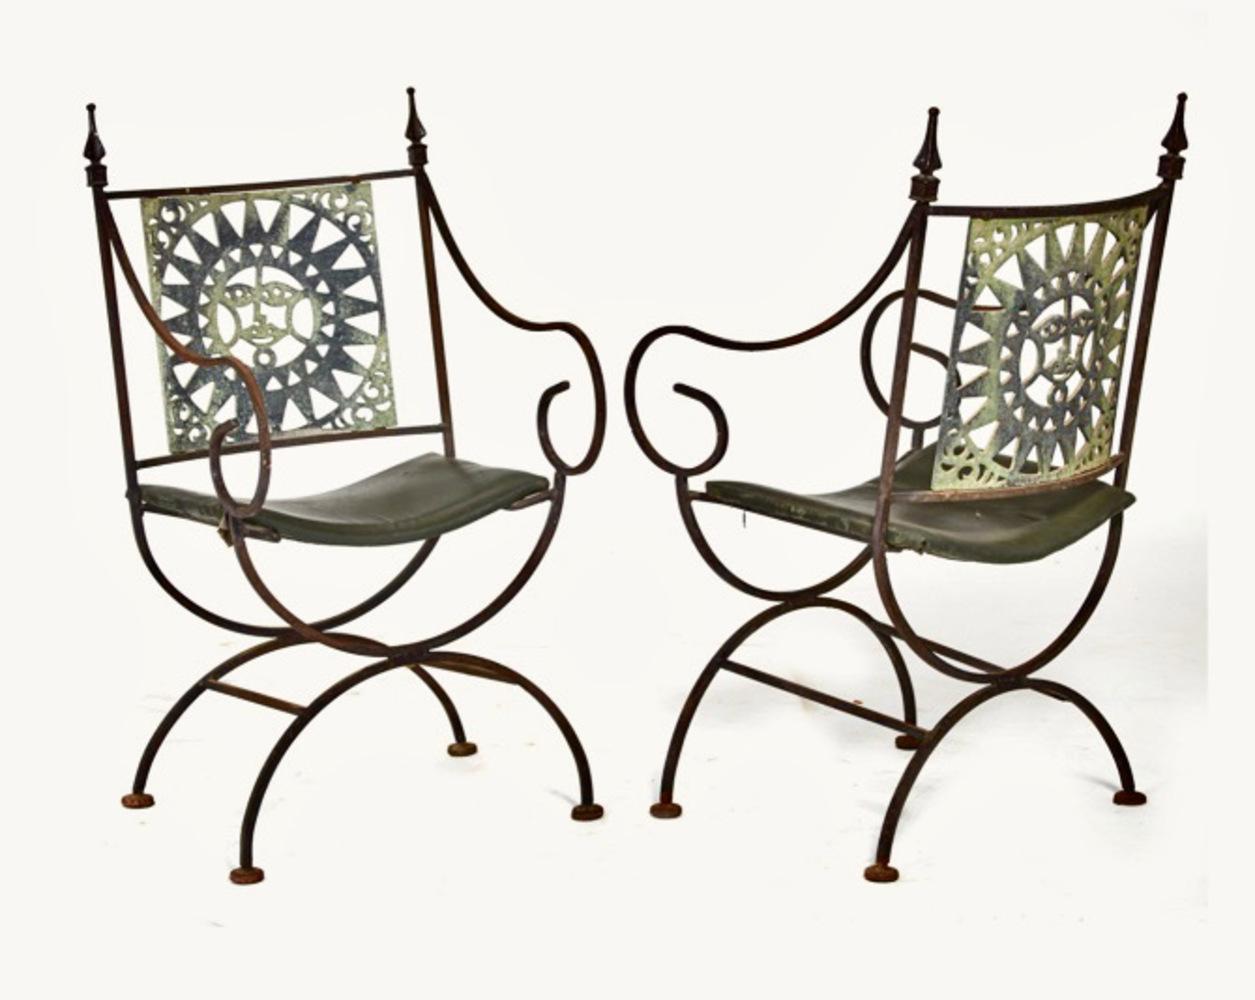 This is a whimsical set of four mid-century forged and cast iron Savonarola -inspired arm chairs. We are attributing the chairs to a mid-century Mexican origin. These are the perfect covered patio chairs, perhaps breakfast room chairs that would add